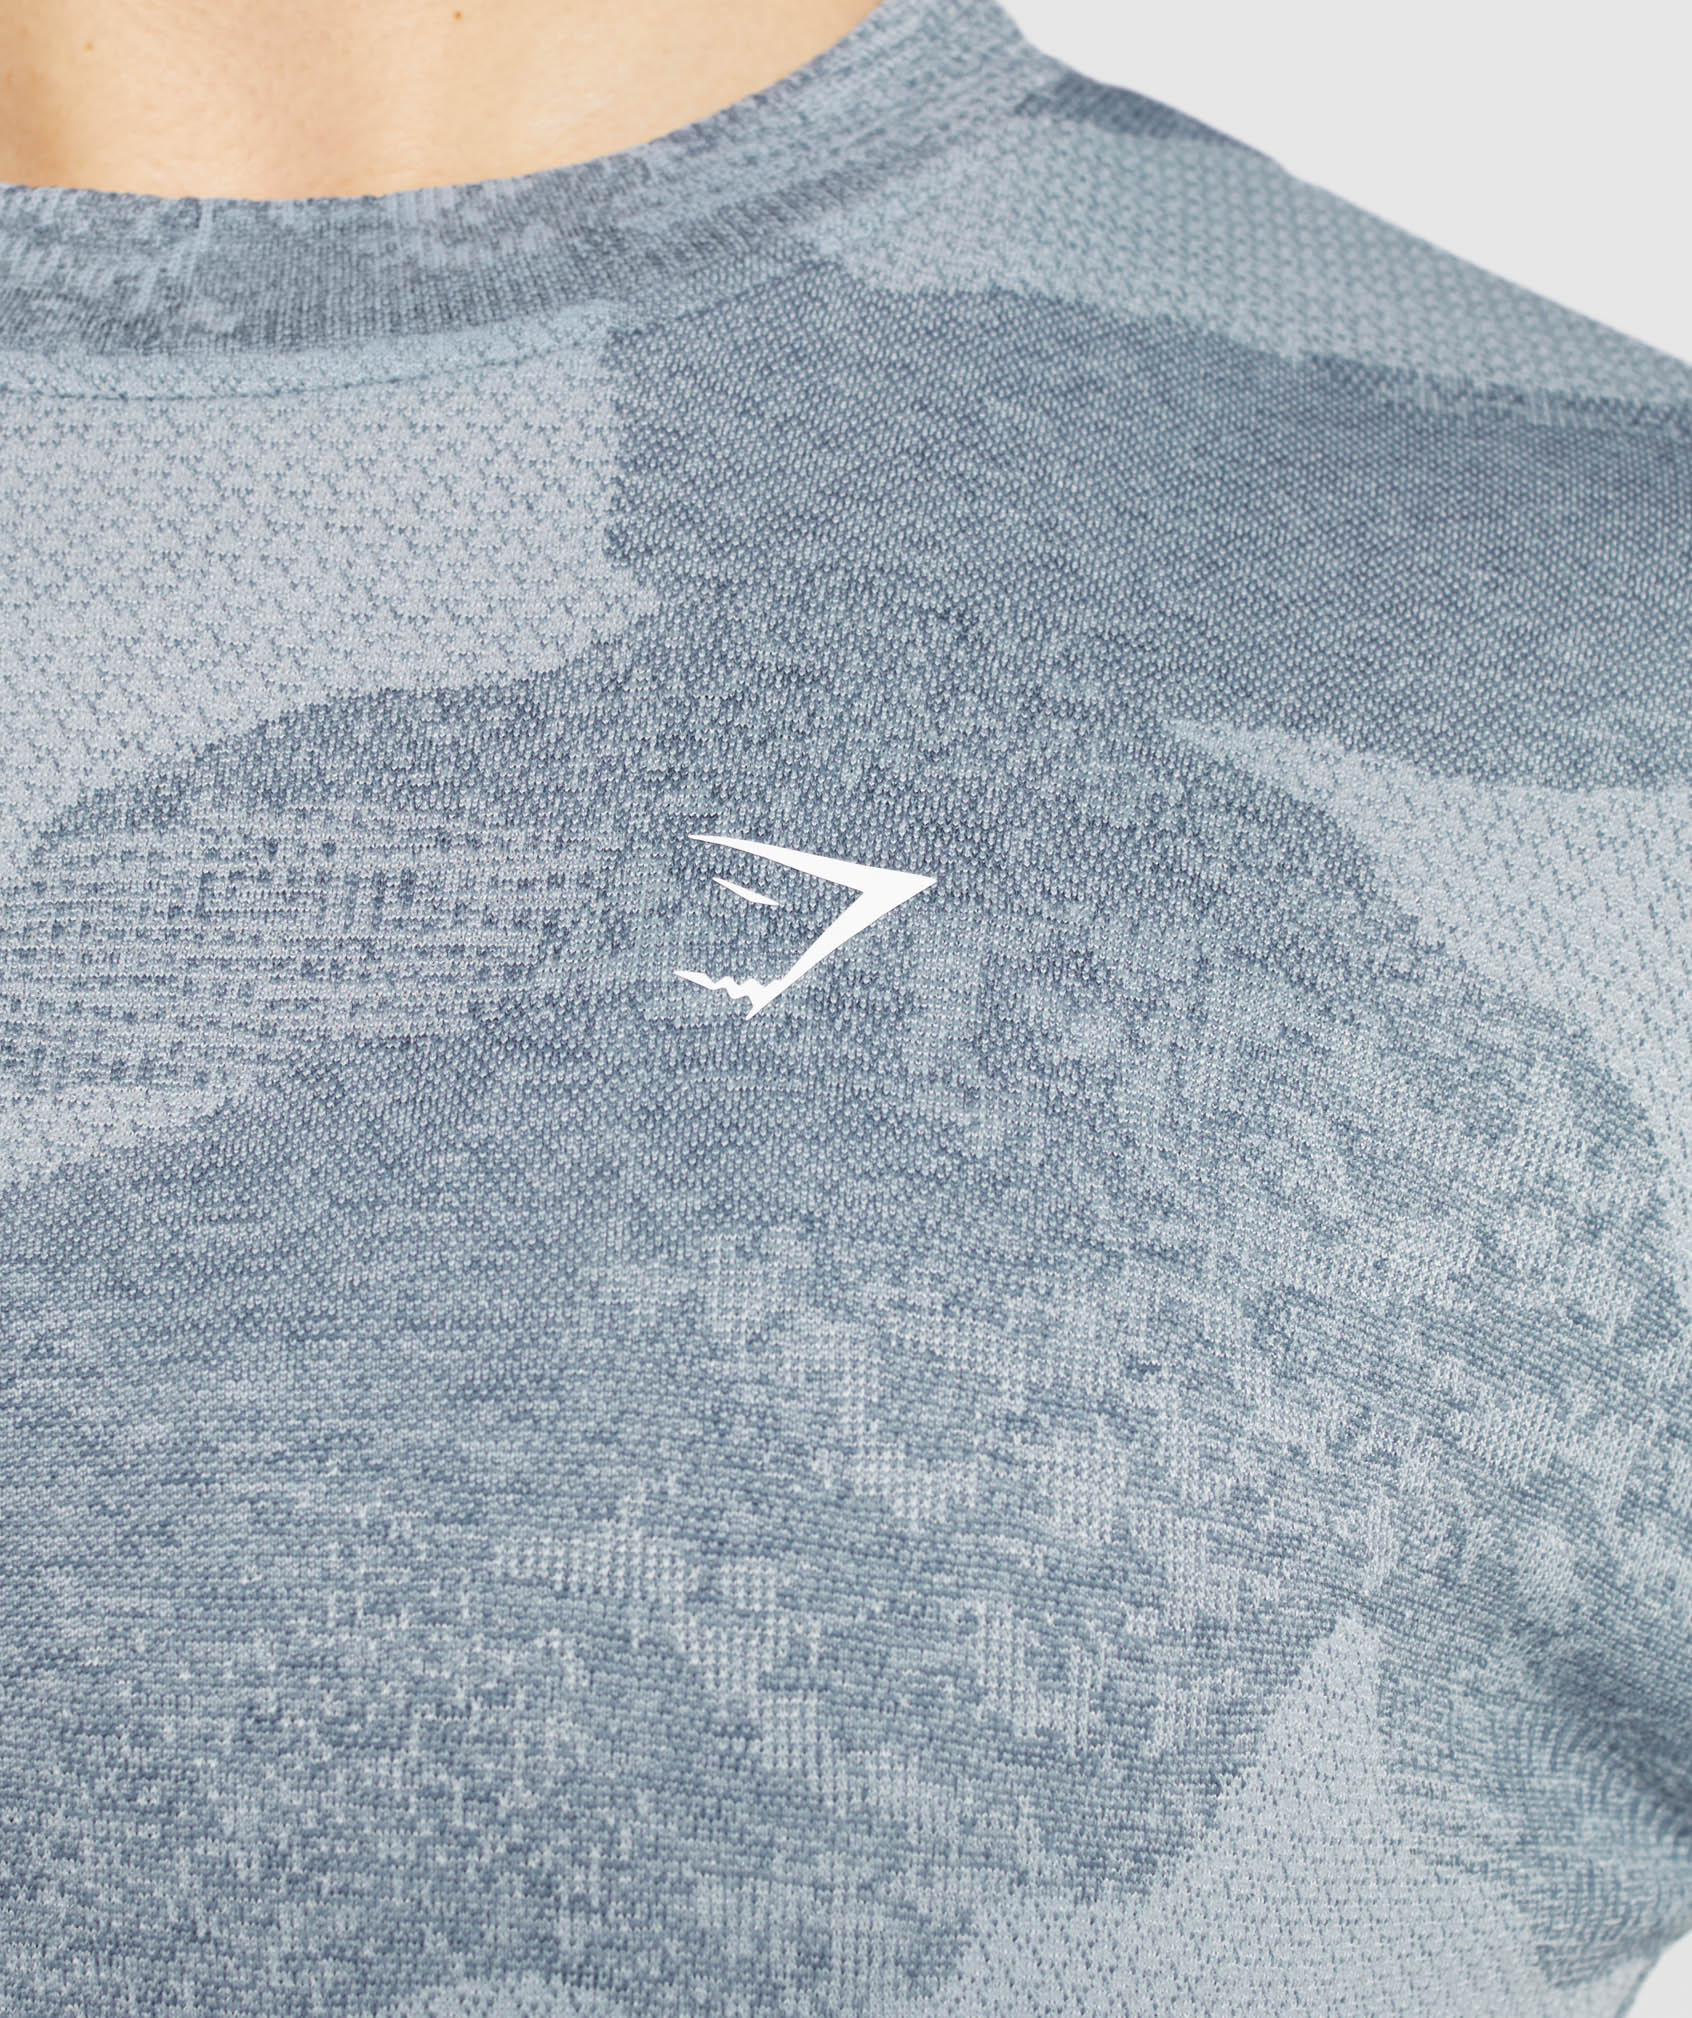 Adapt Camo Seamless Long Sleeve Top in River Stone Grey/Evening Blue